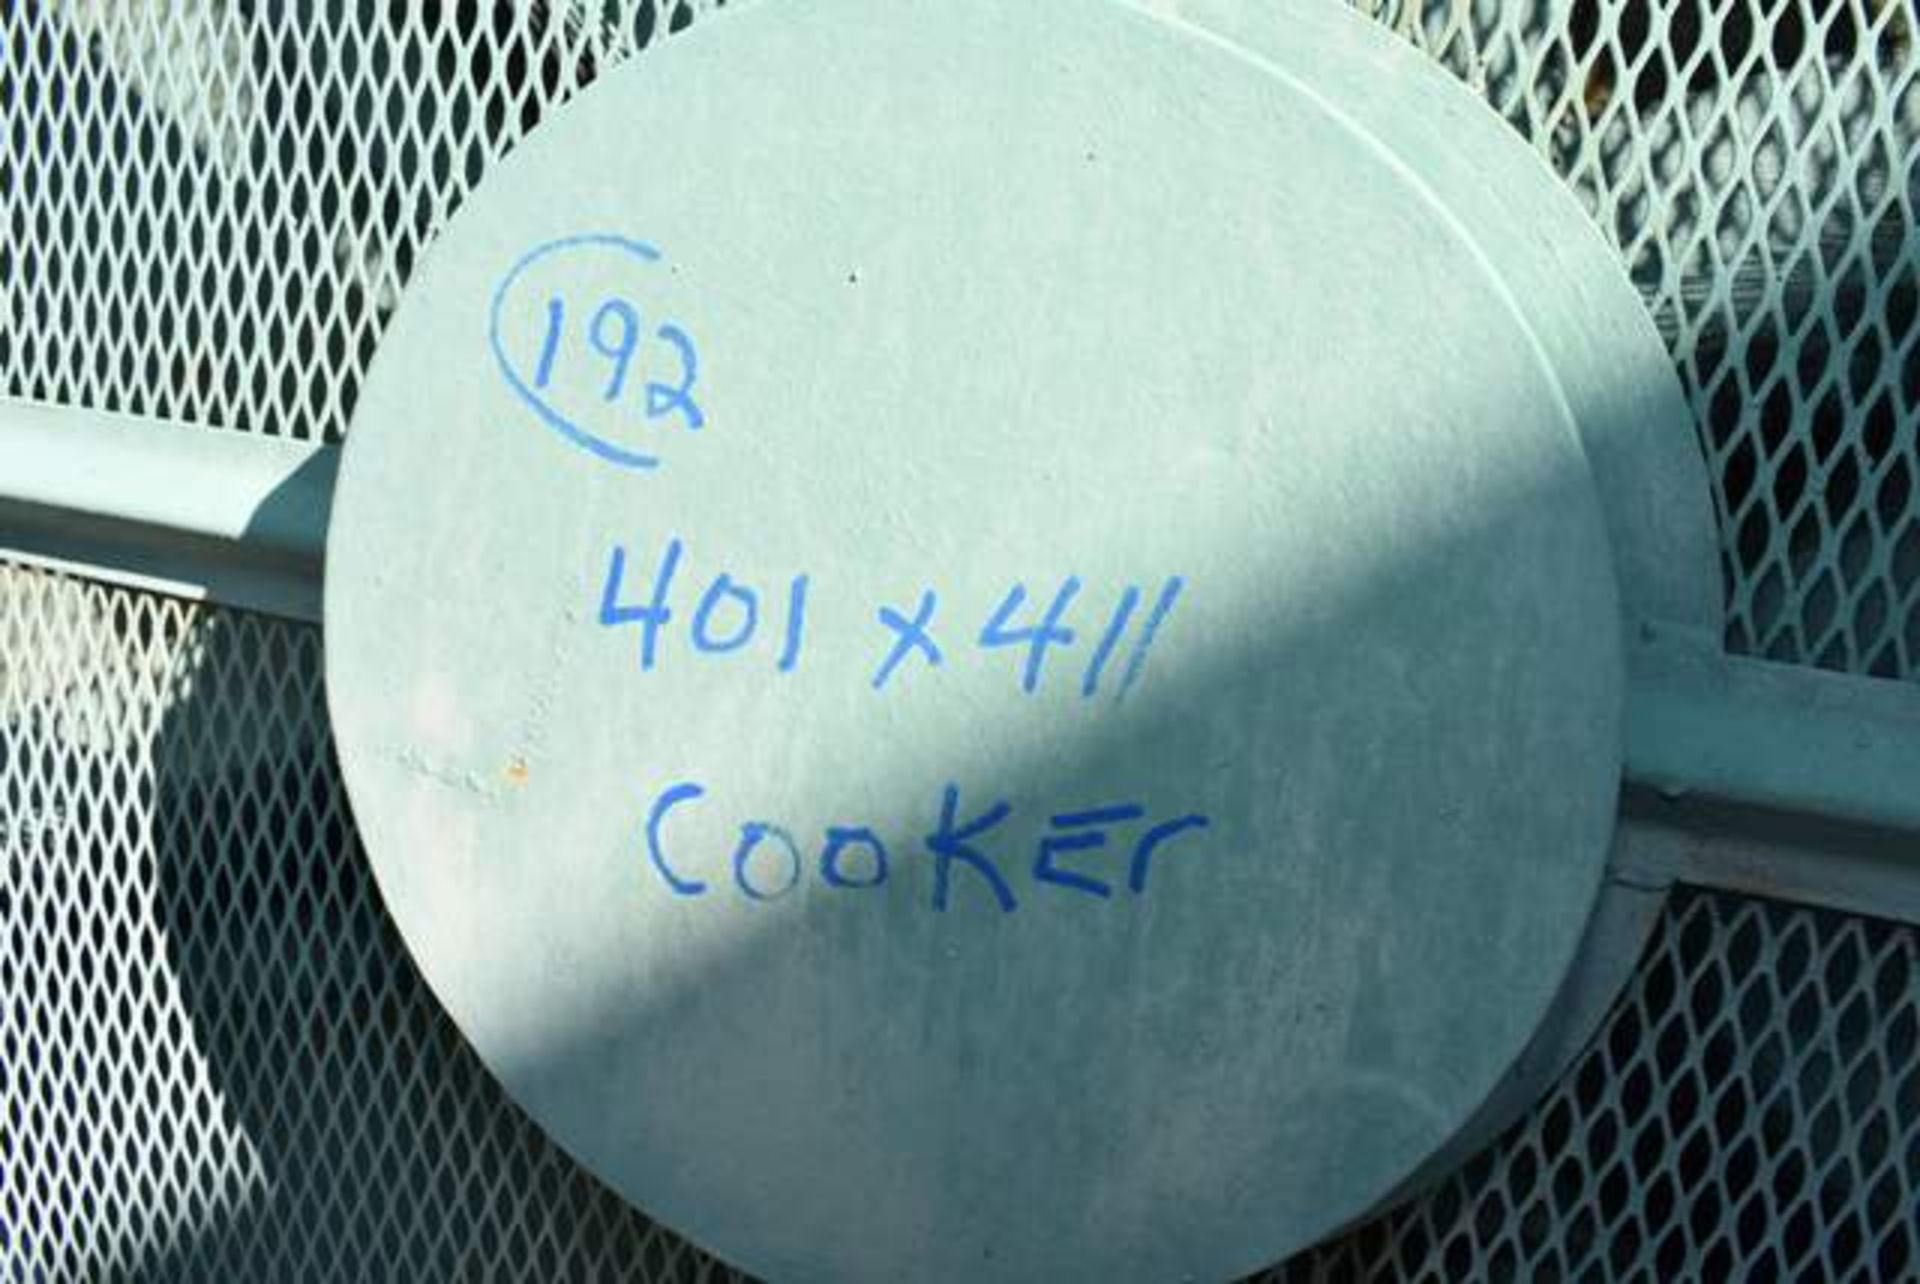 FMC 72" Diameter x 34'L Cooker , S/N 3545 2 62, Set: 401 x 411, Can Capacity 3330, Stainless T's and - Image 2 of 4